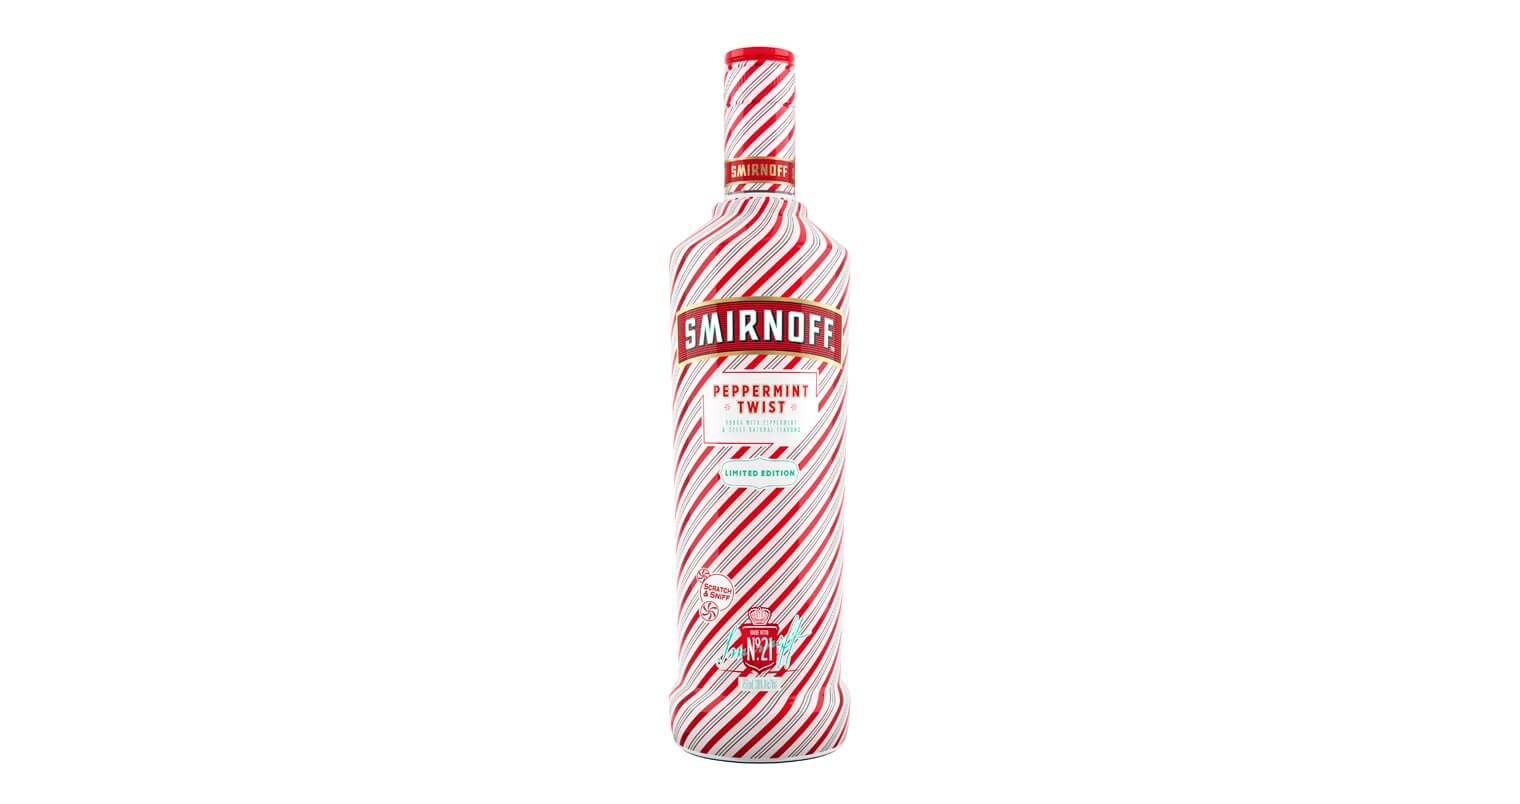 Smirnoff Peppermint Twist is Back for the Holiday Season, featured image